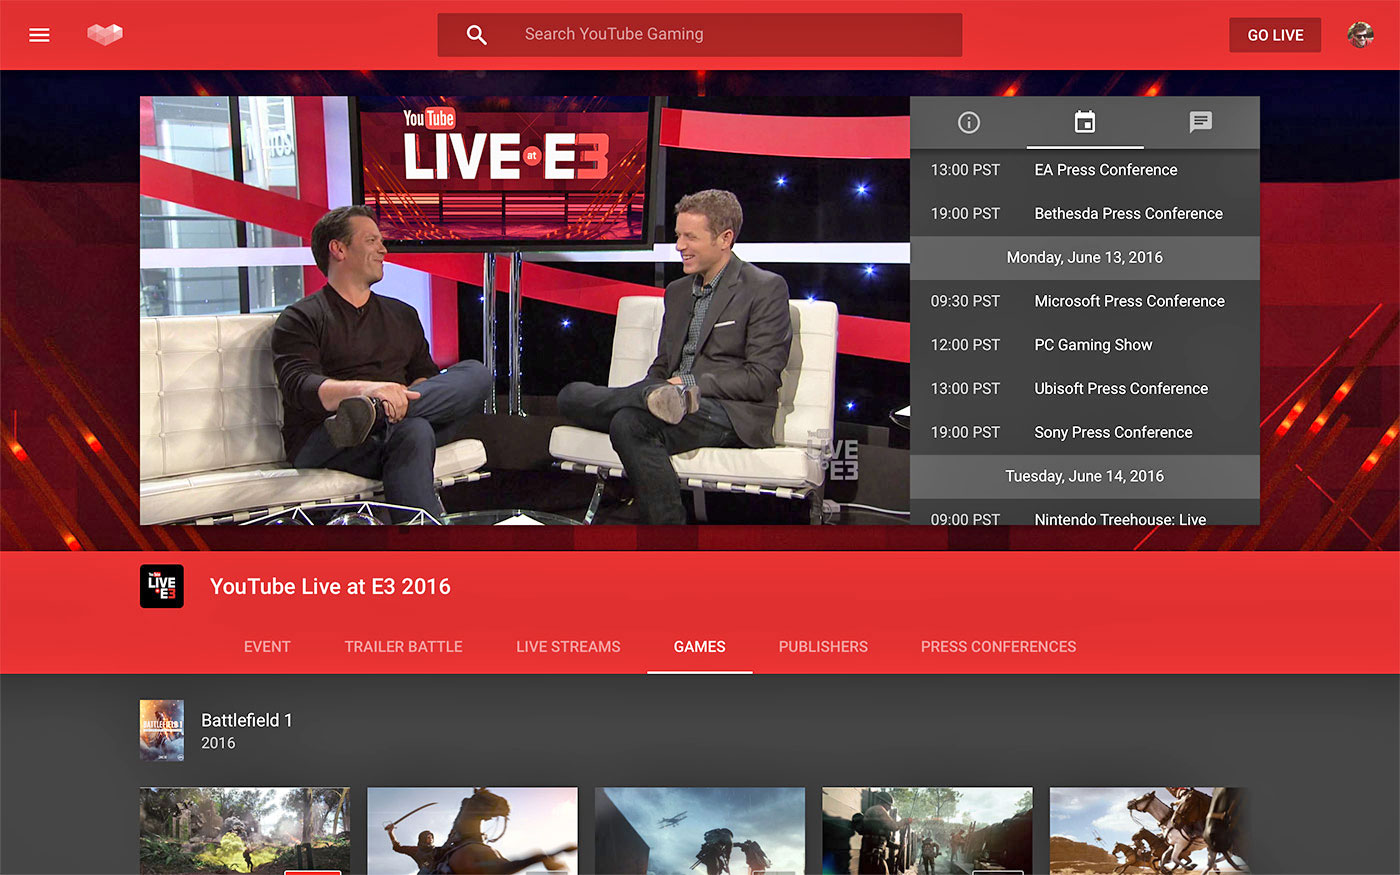 YouTube Gaming launches event hubs with E3 live streams